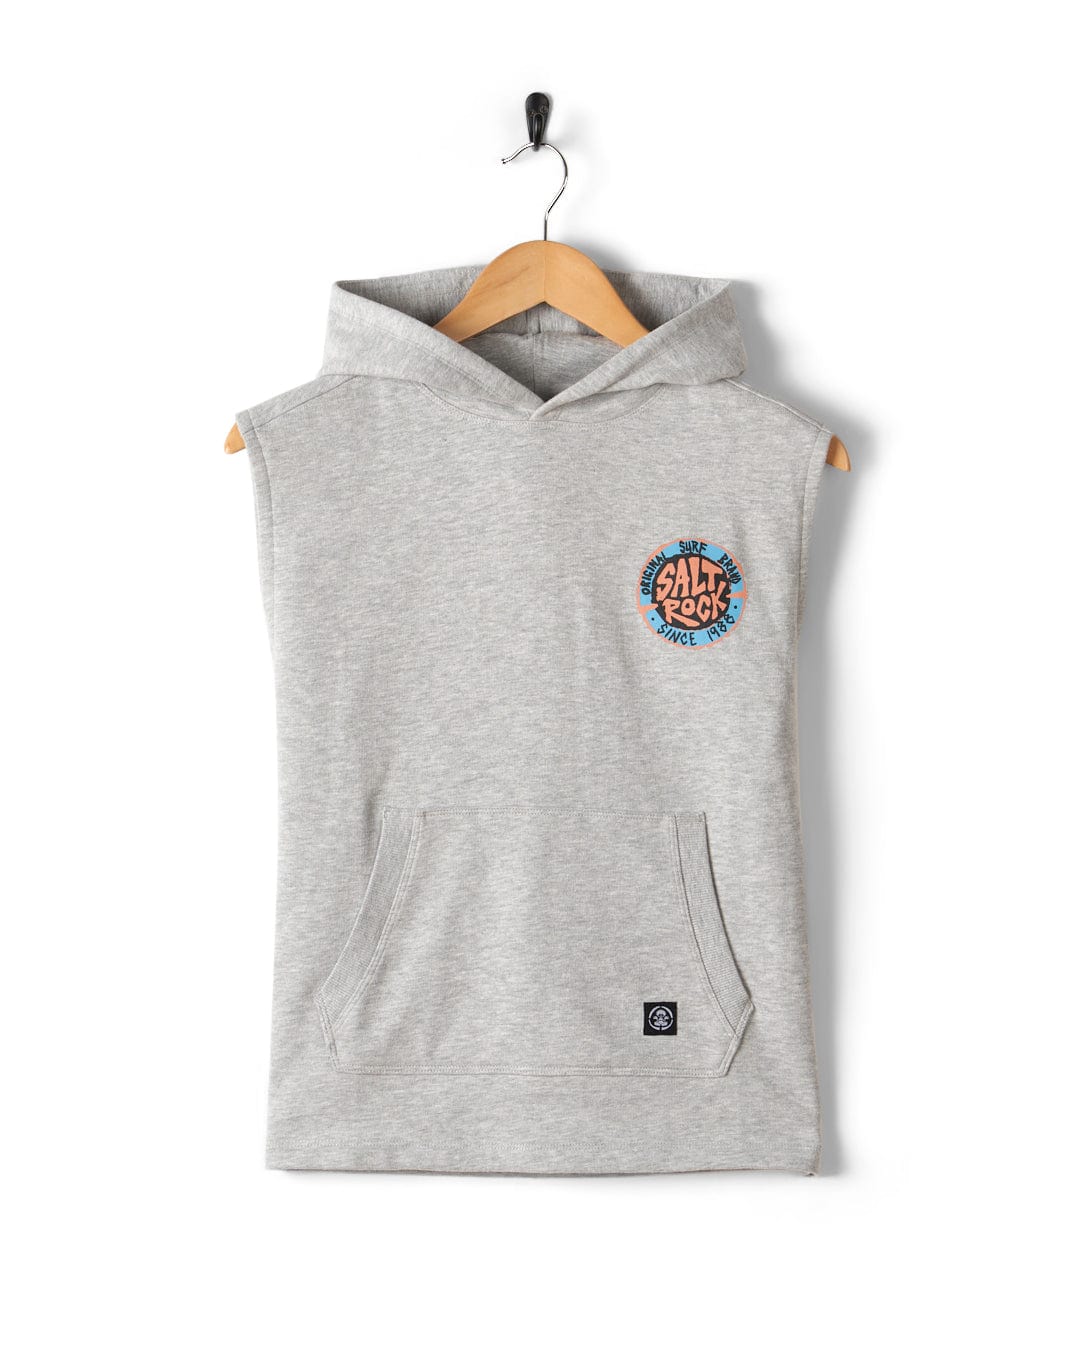 Grey melange sleeveless SR Original - Kids Pop Hoodie with front pocket and Saltrock graphic hanging on a wall.